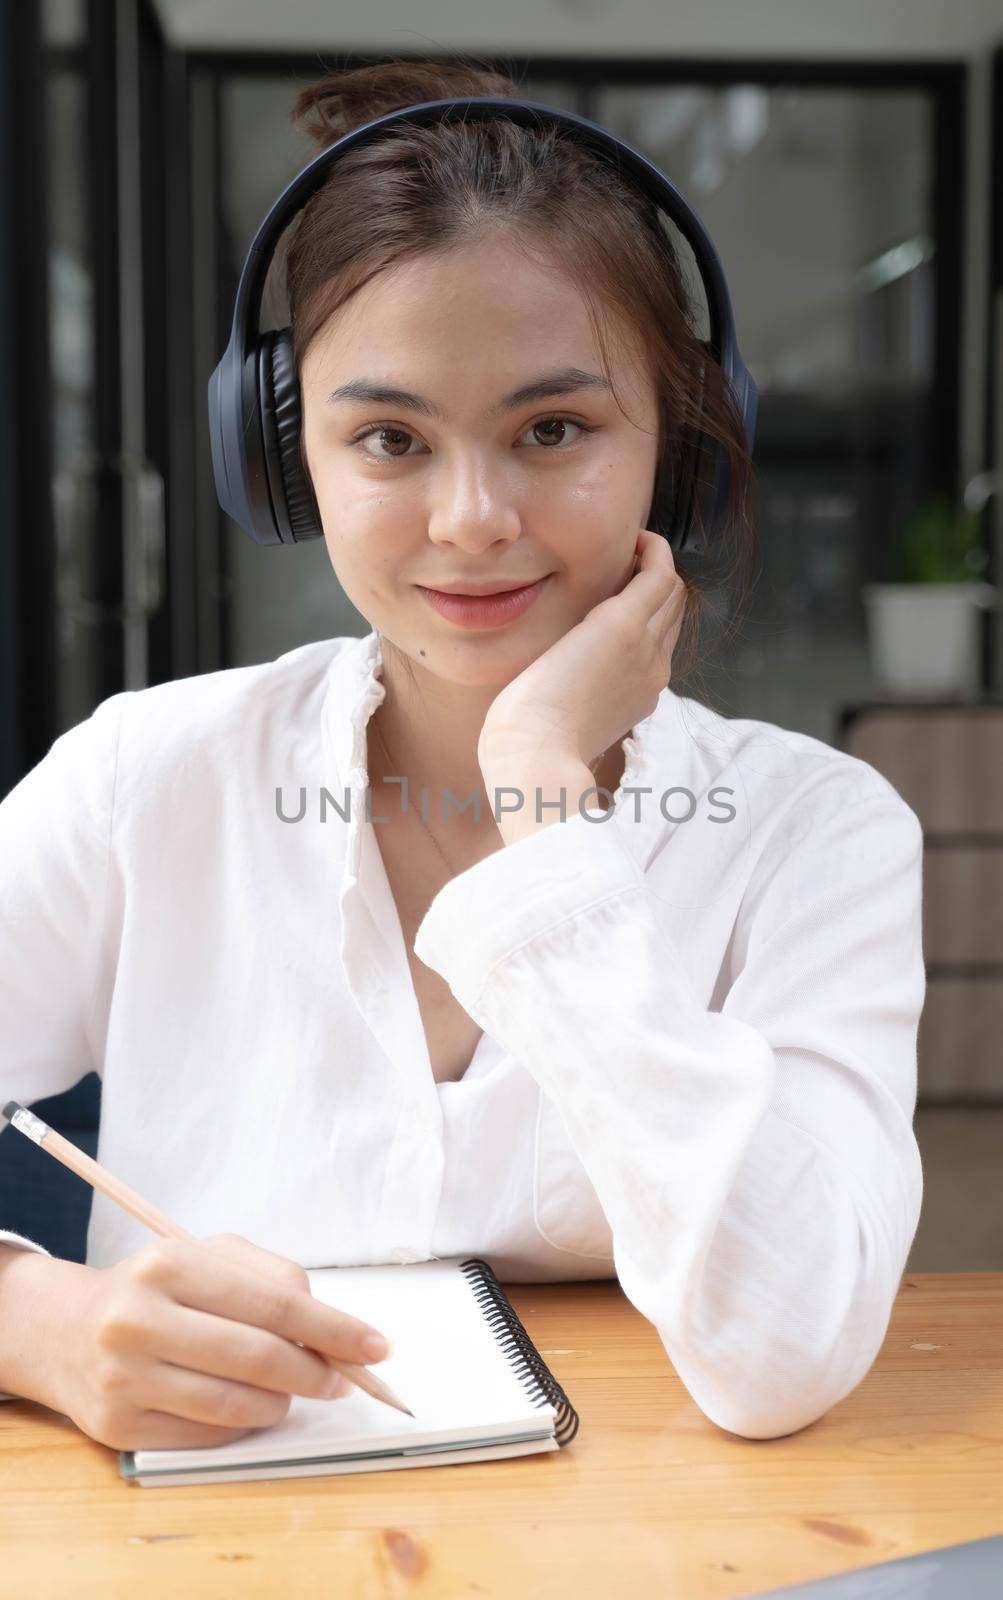 Image of a young woman studying online using a tablet. Looking at the camera..